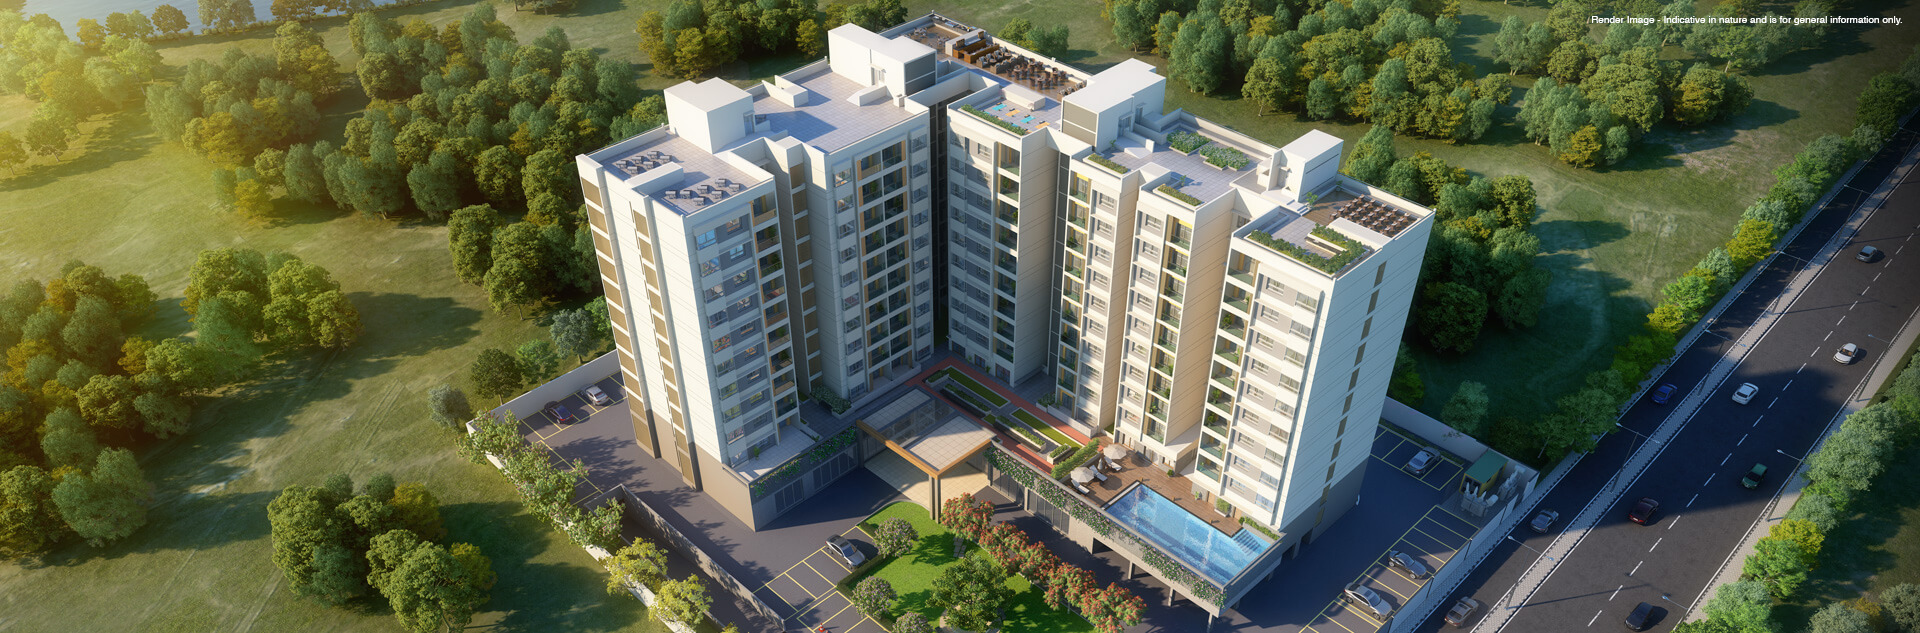 The Virtuoso Club and Serviced Residences, a premium retirement community by Columbia Pacific Communities in Bangalore